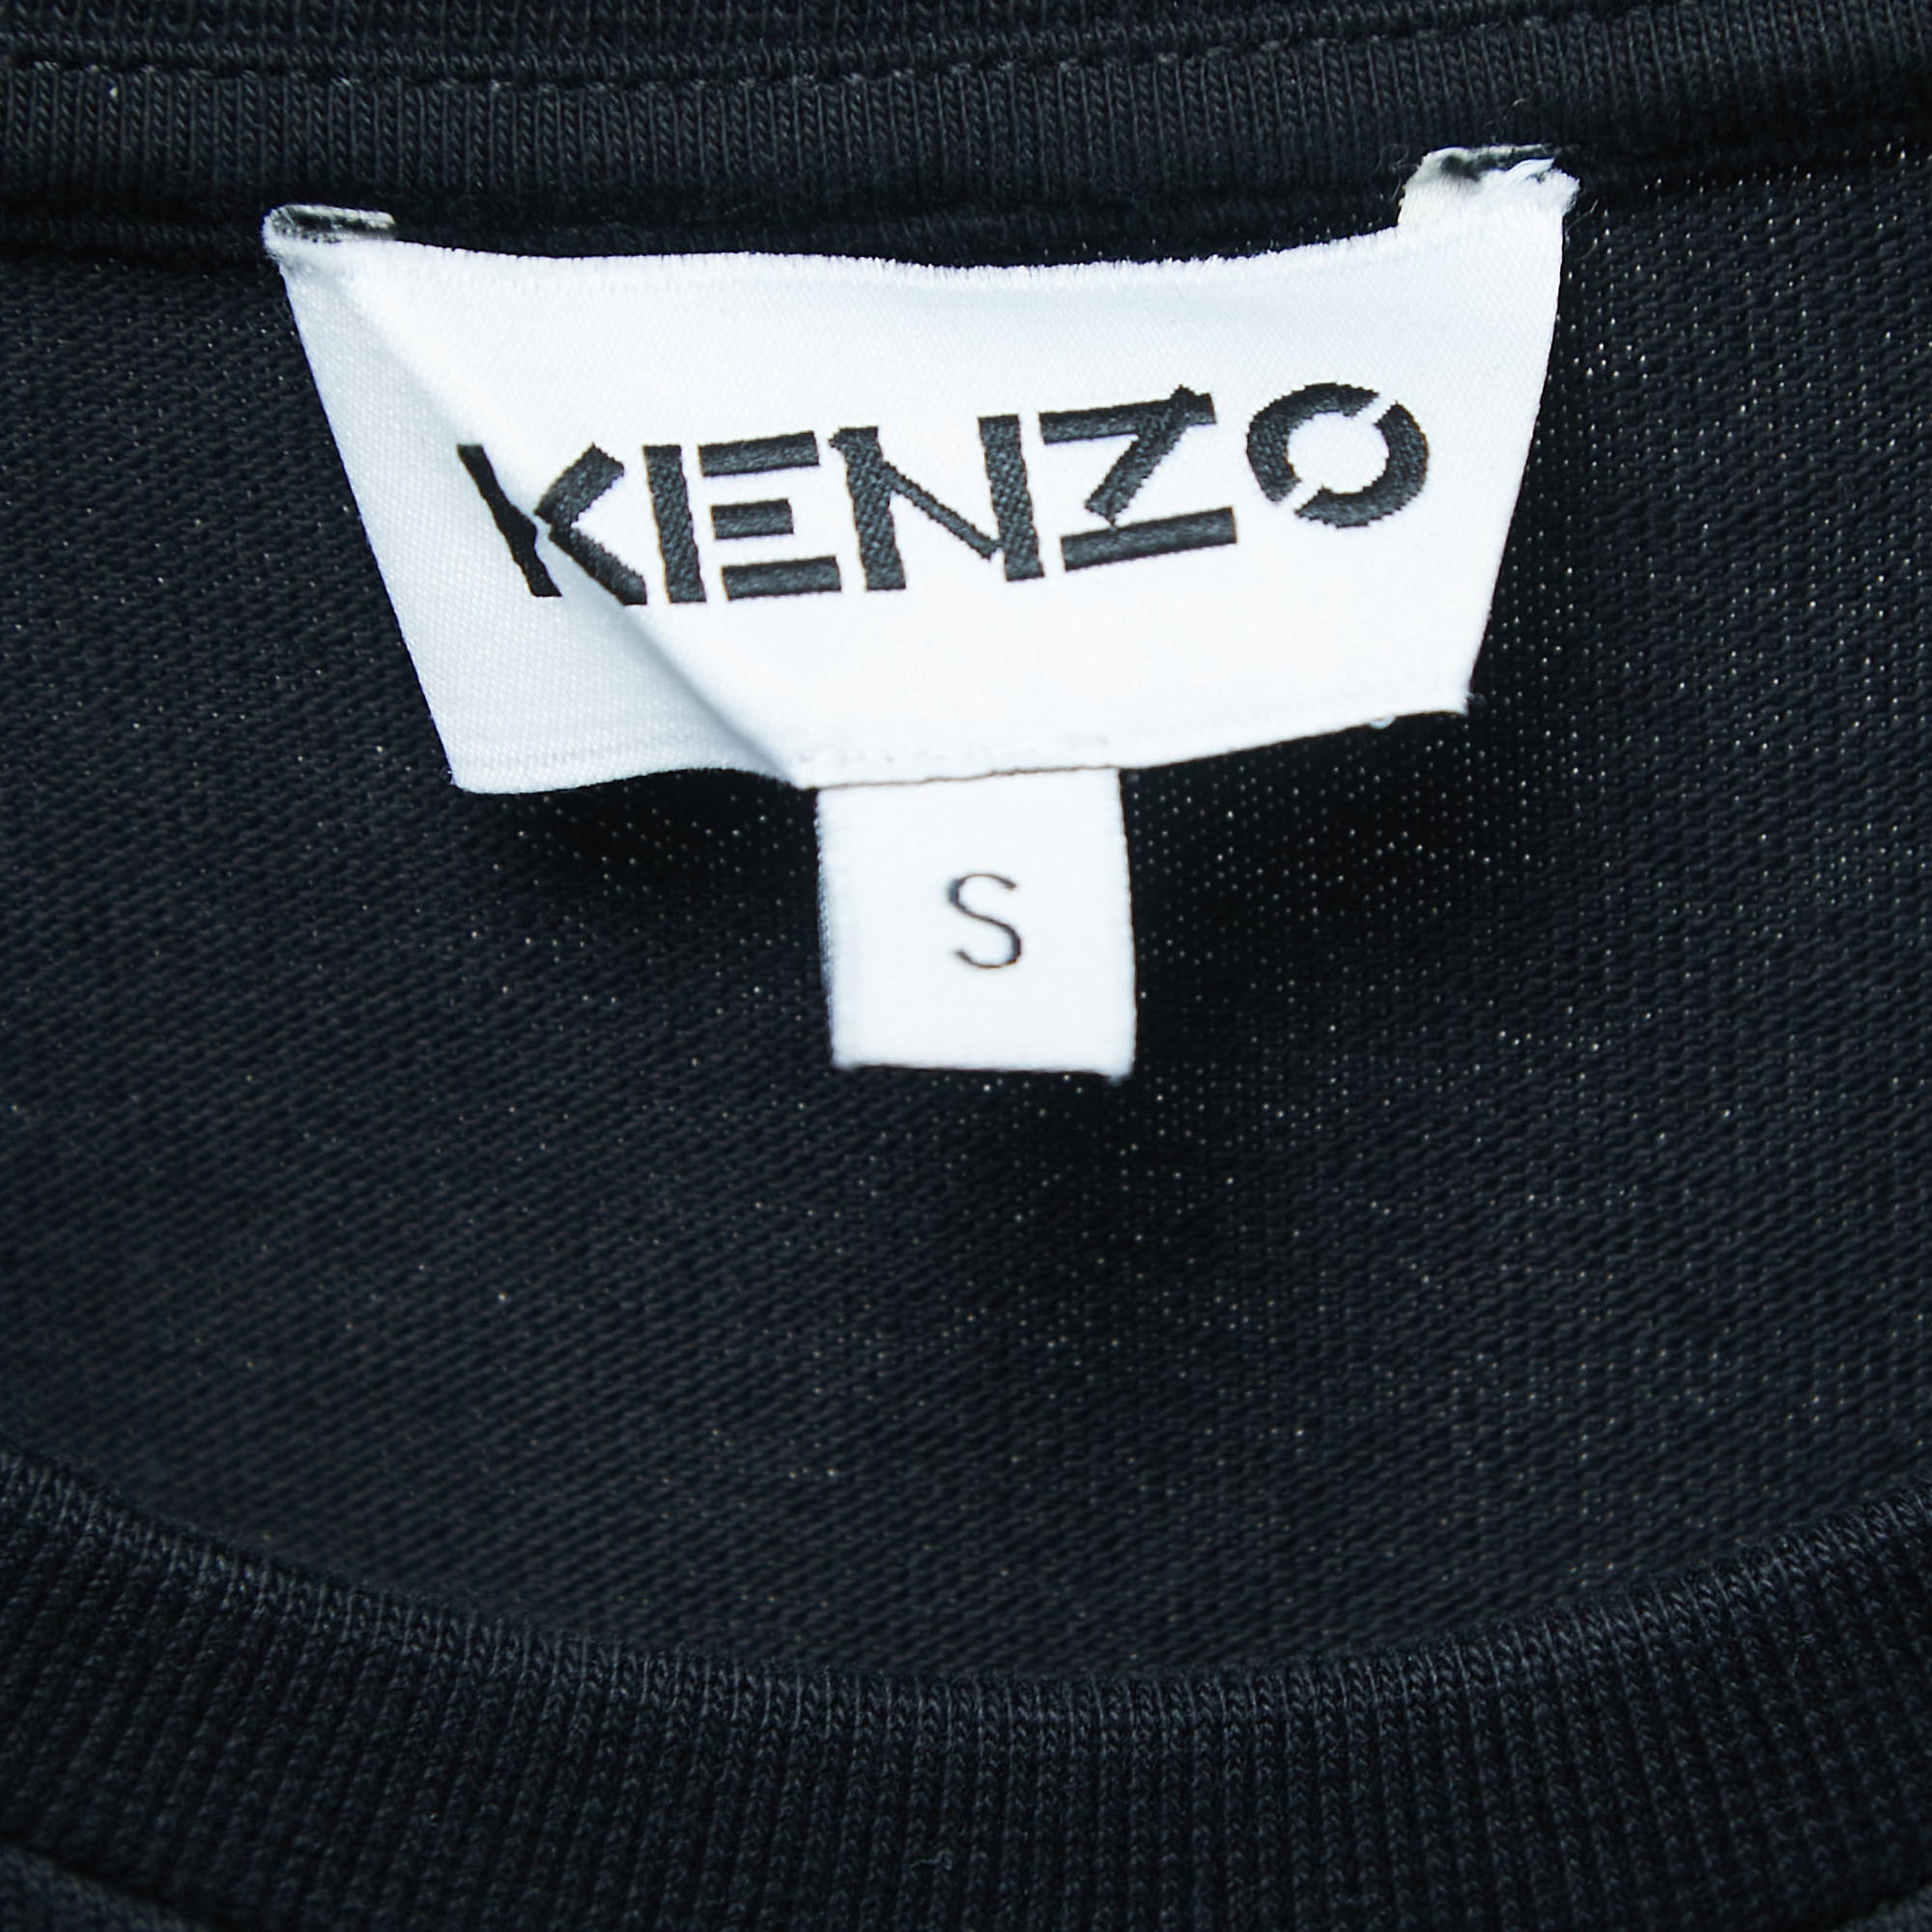 Kenzo Black Tiger Embroidered Cotton Knit Oversized T-Shirt S